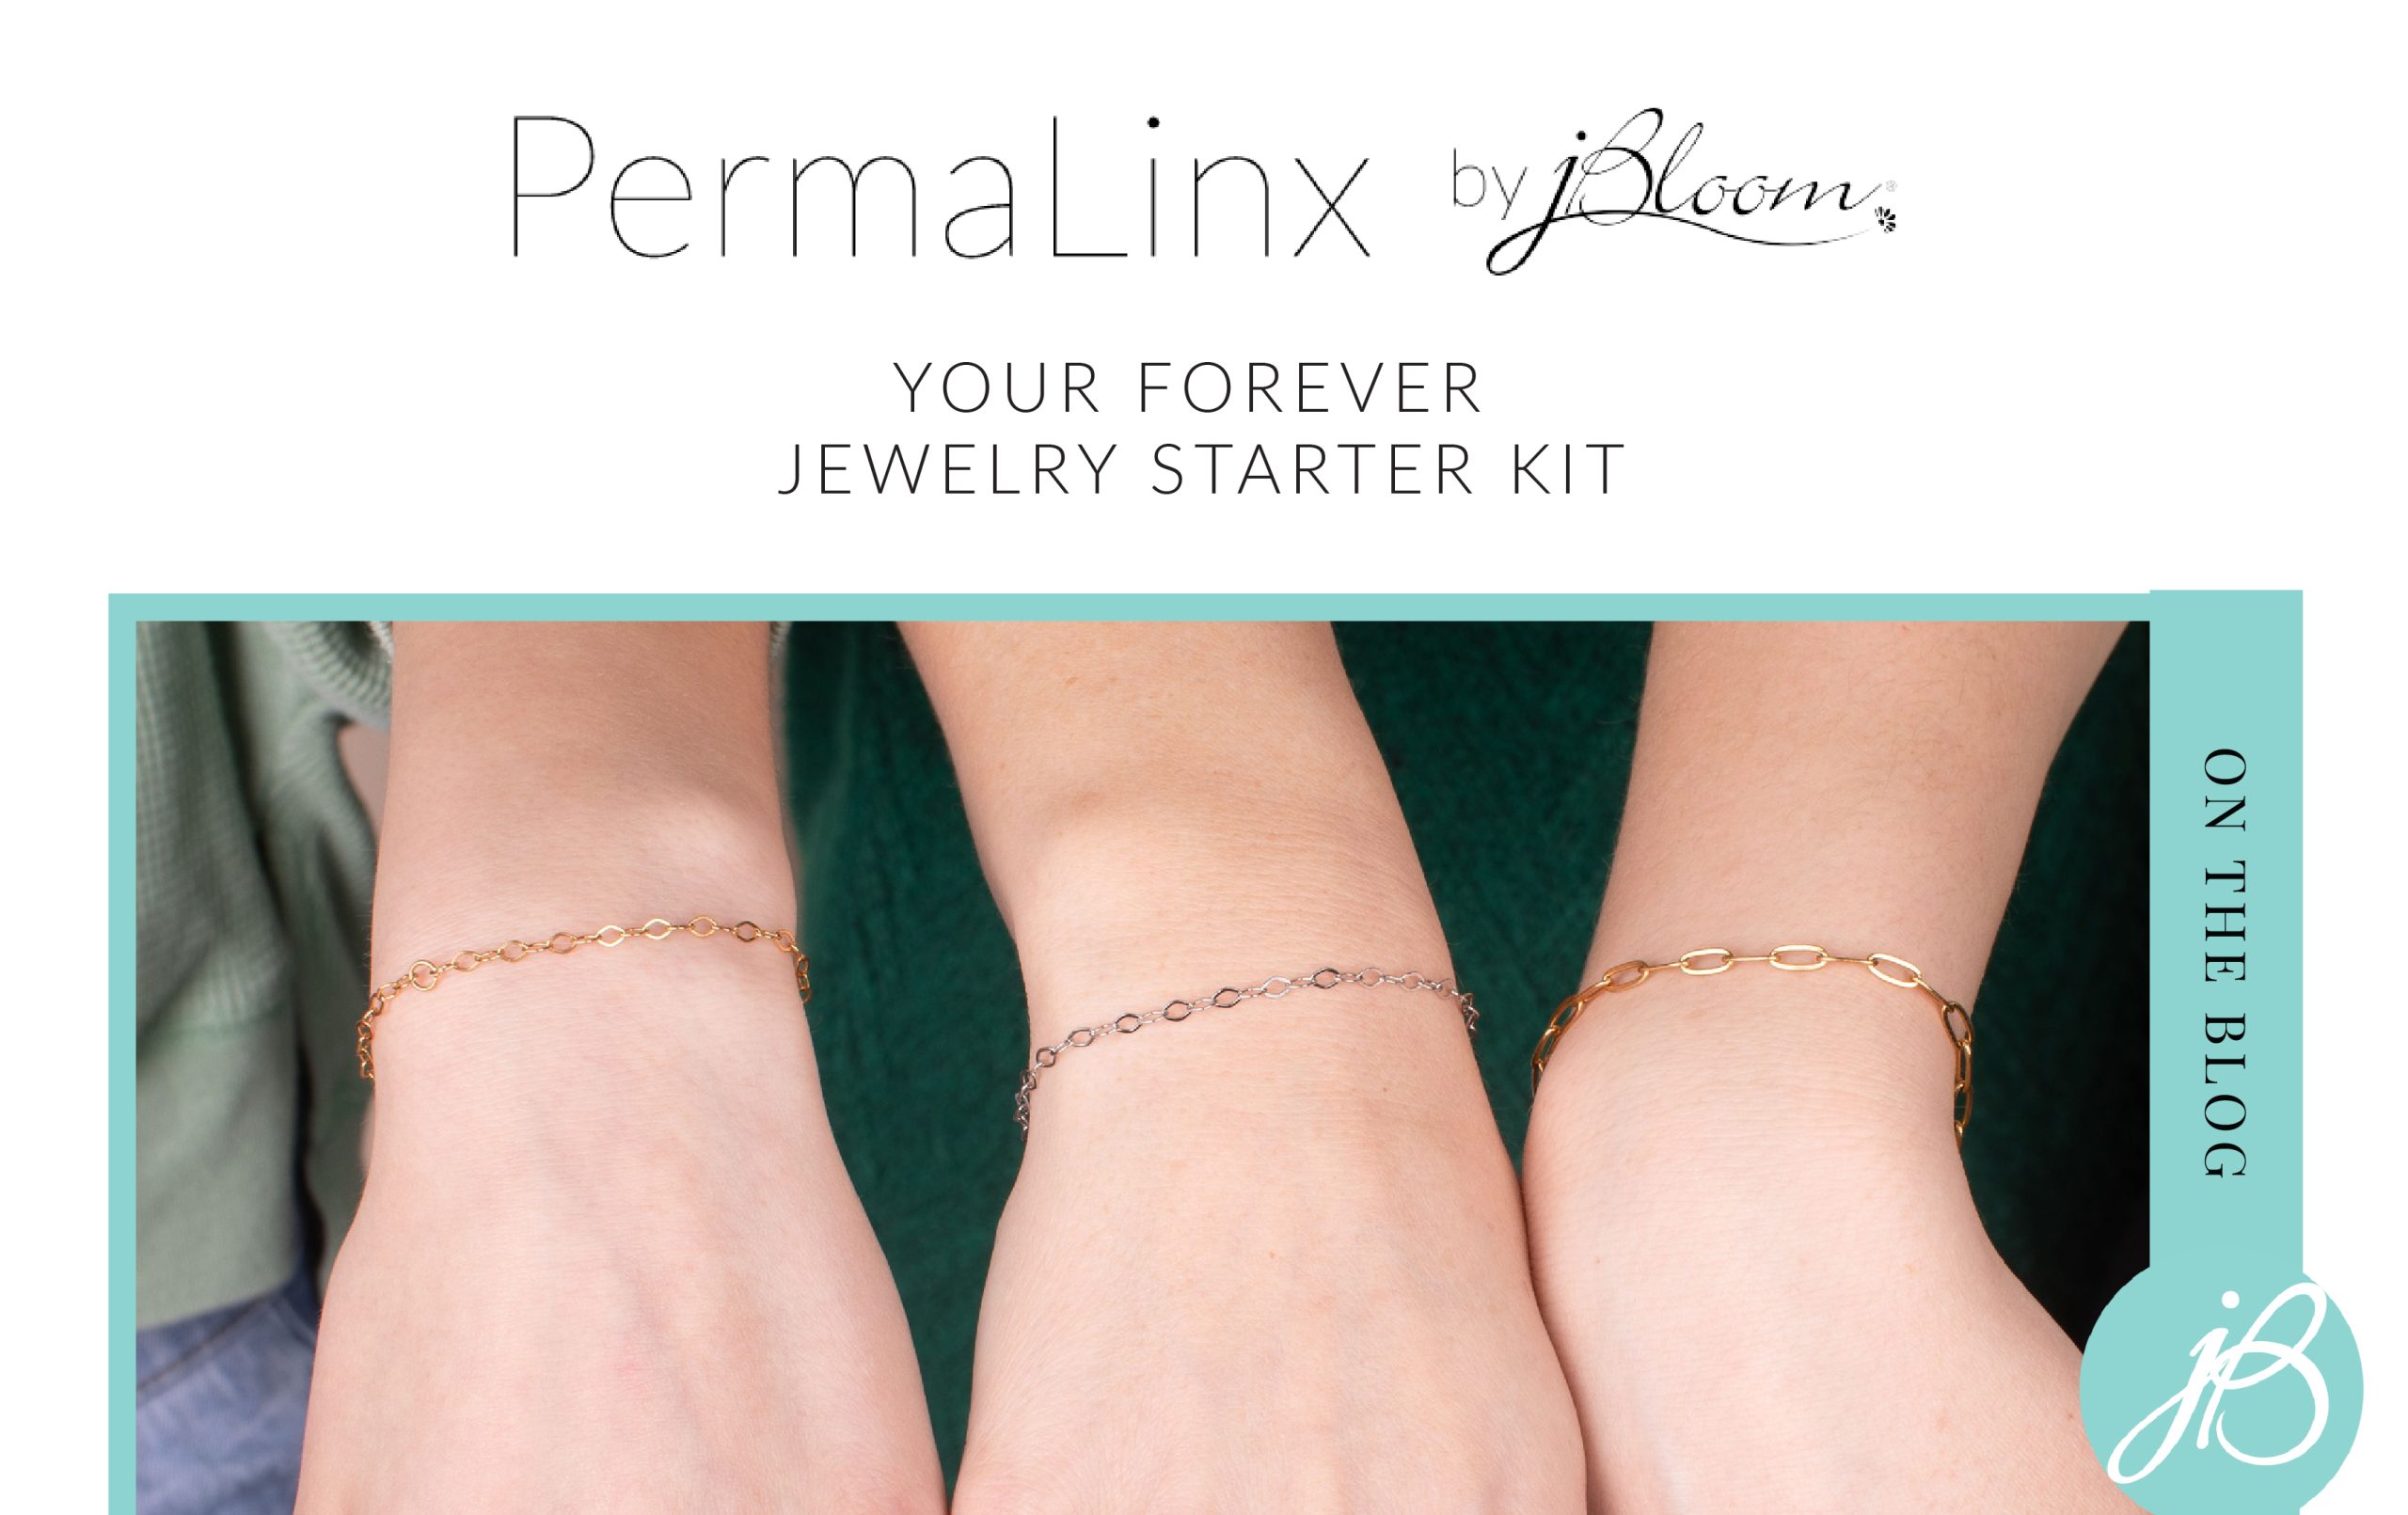 Where to Get a Forever Jewelry Starter Kit